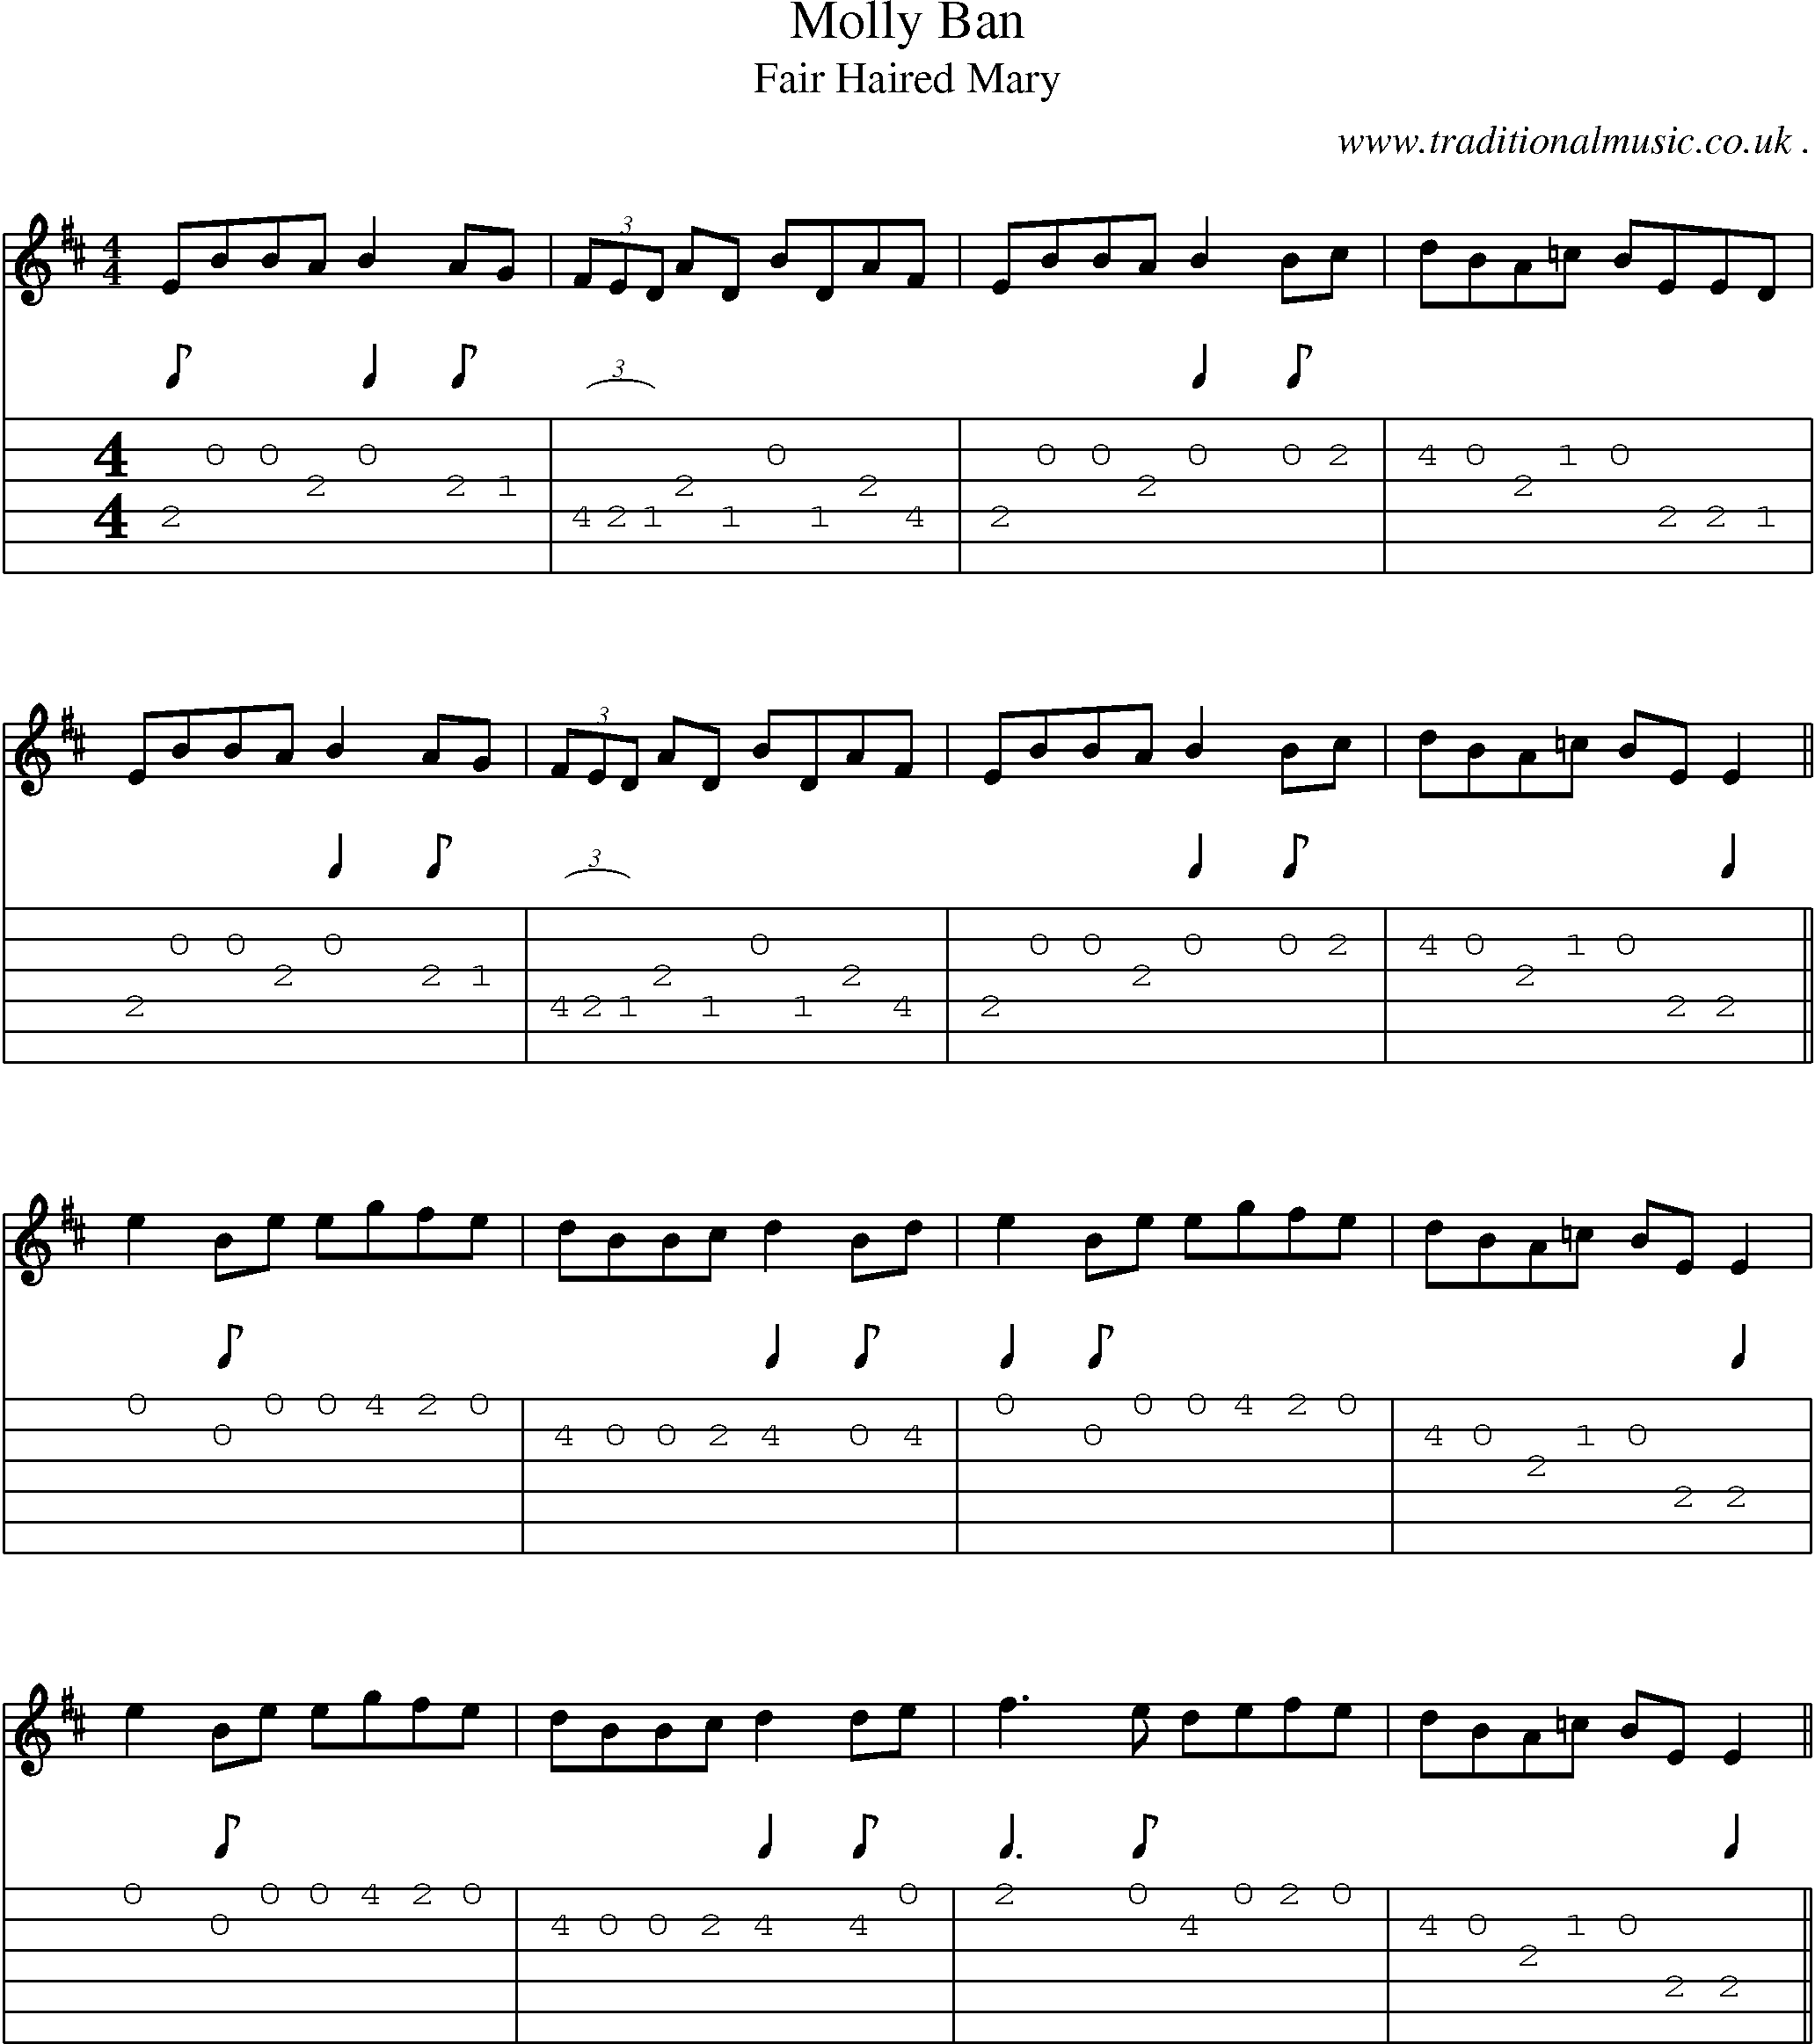 Sheet-Music and Guitar Tabs for Molly Ban